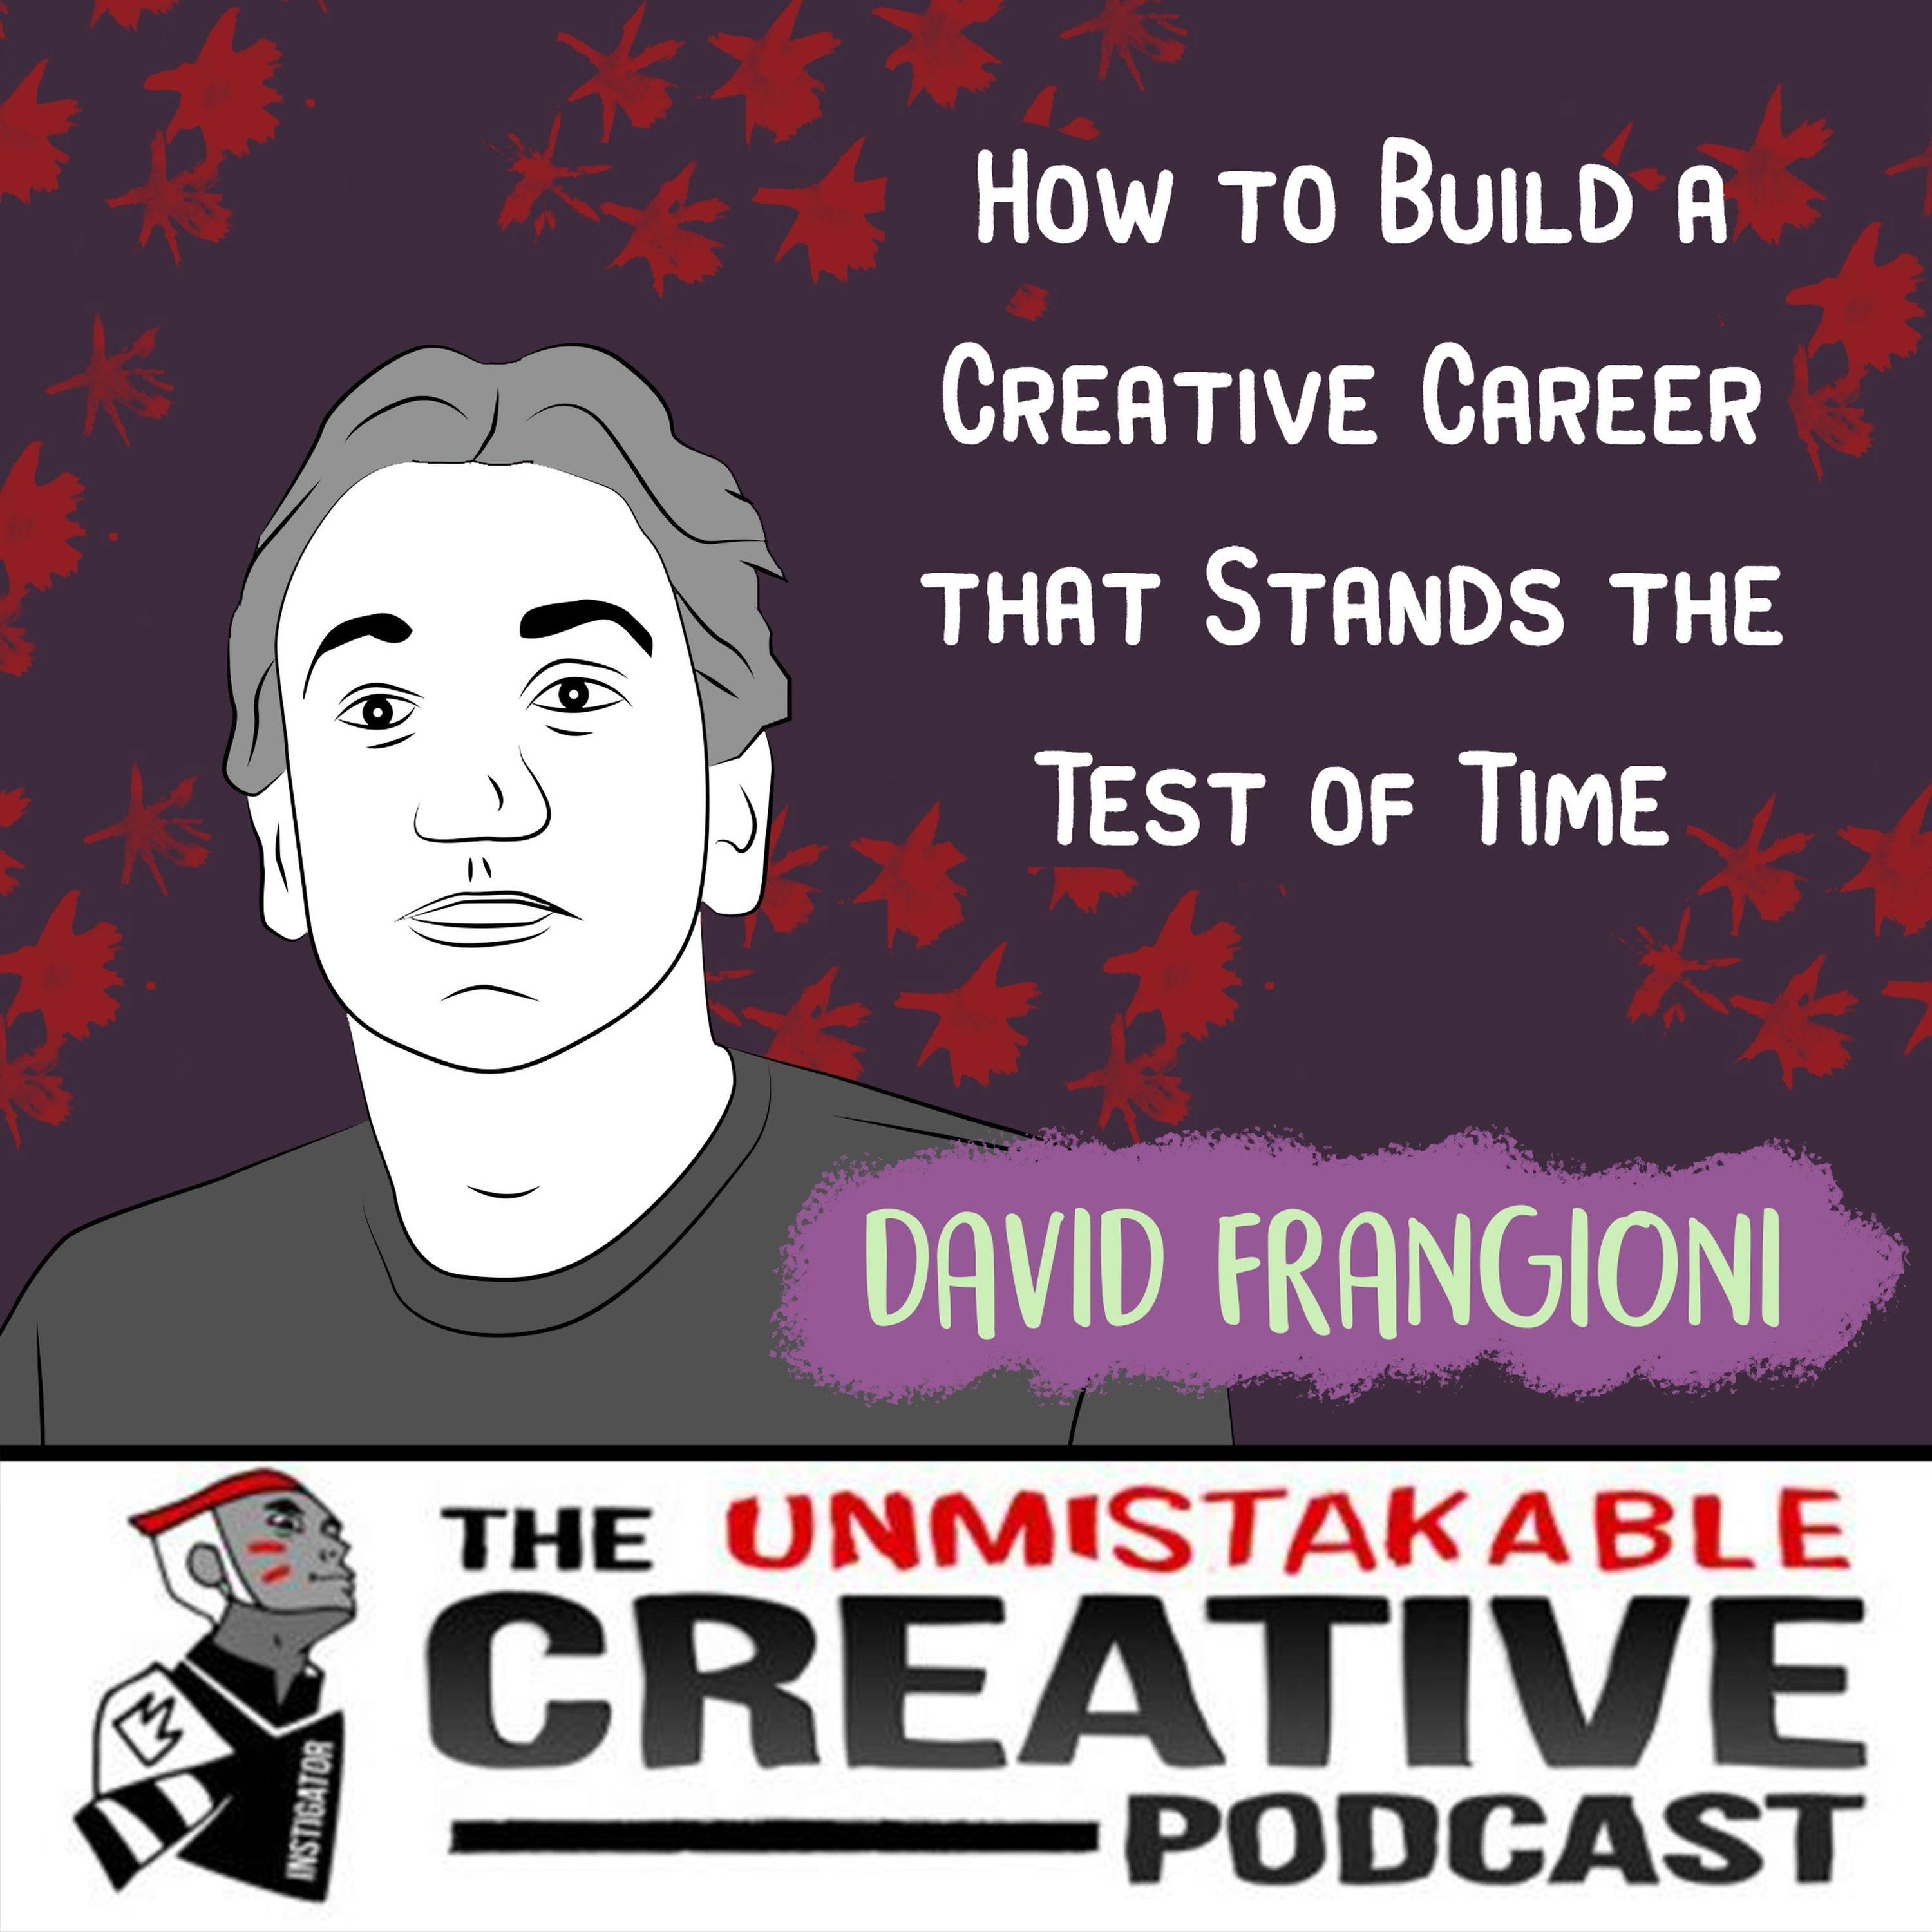 David Frangioni: How to Build a Creative Career that Stands the Test of Time